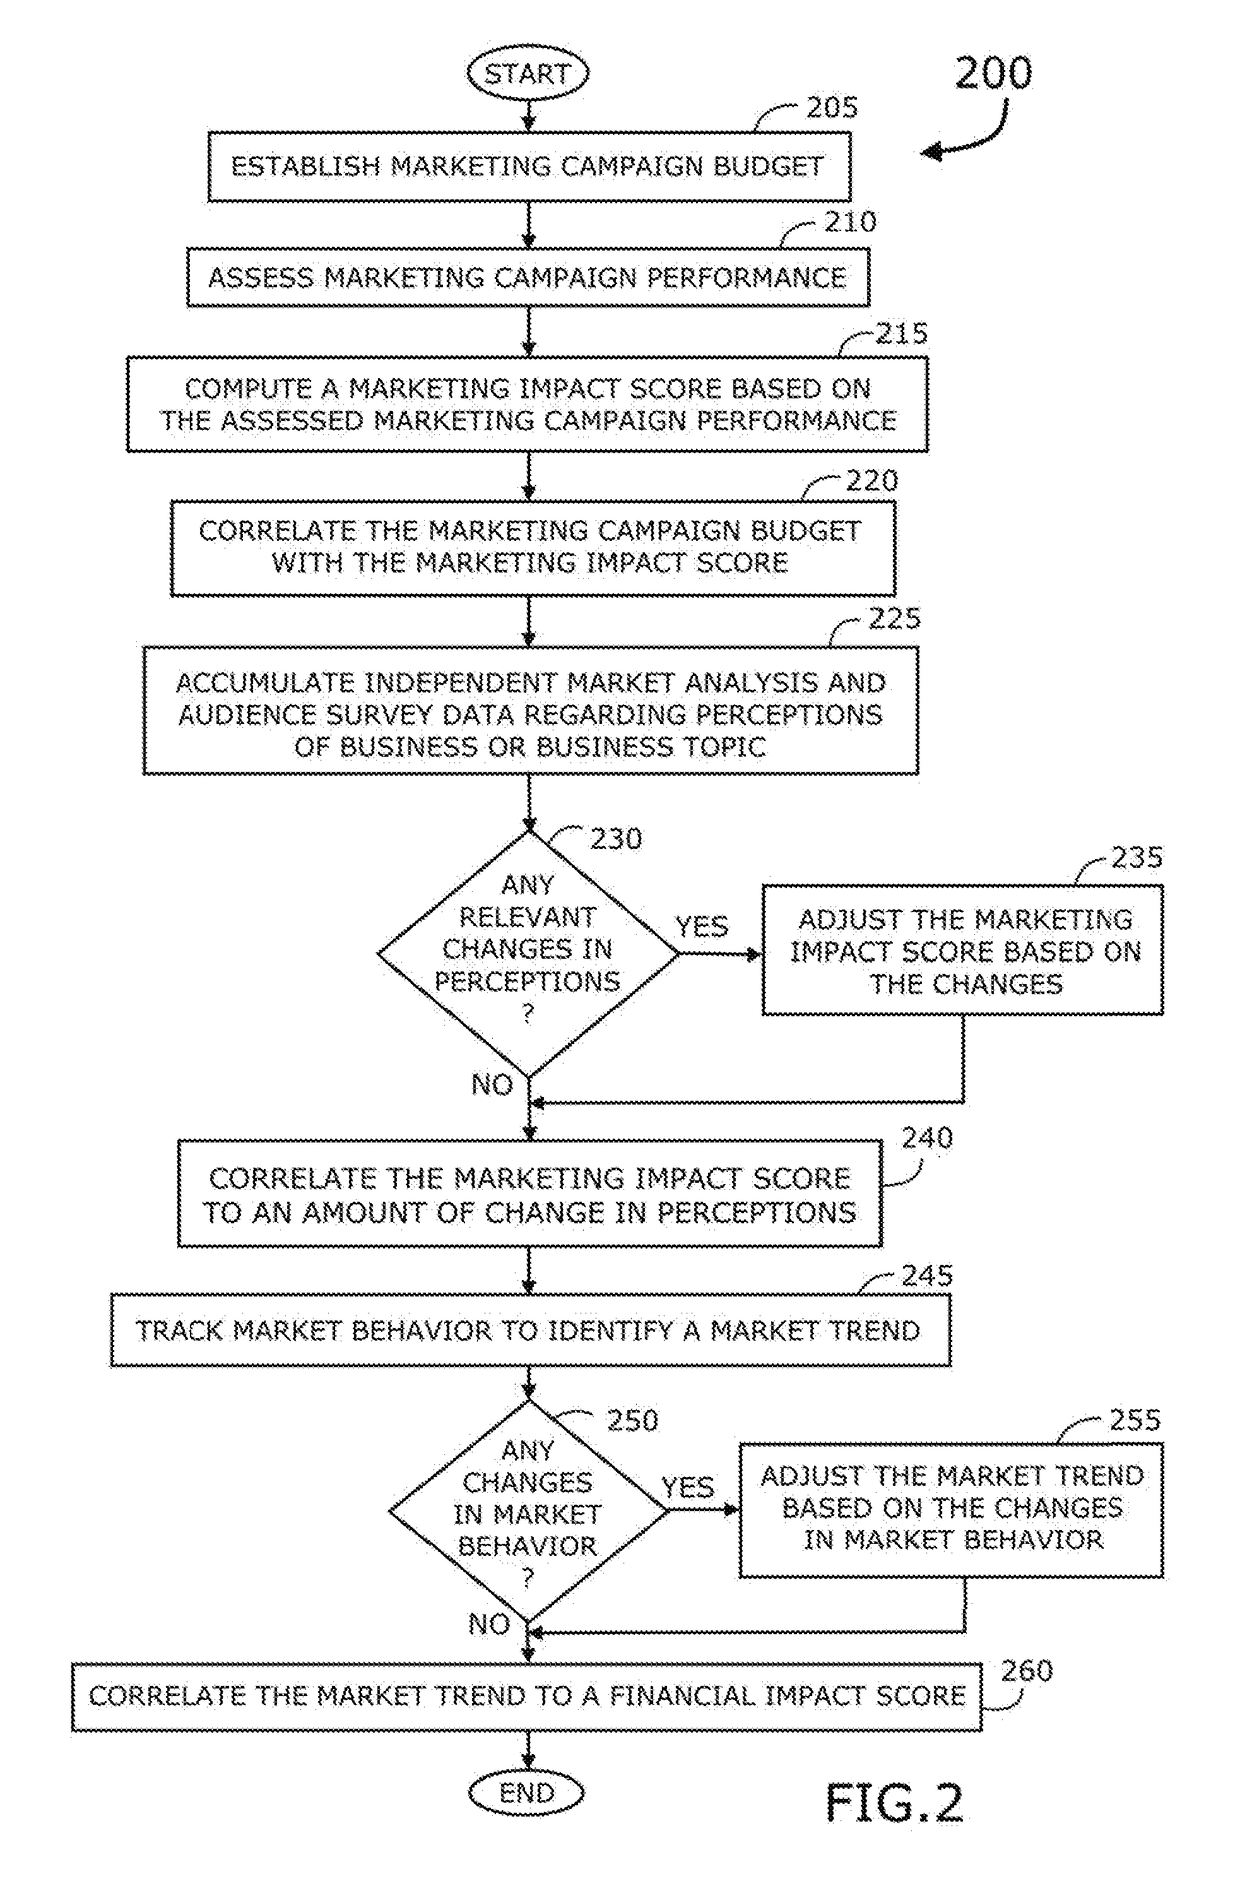 System and methods for connecting marketing investment to impact on business revenue, margin, and cash flow and for connecting and visualizing correlated data sets to describe a time-sequenced chain of cause and effect